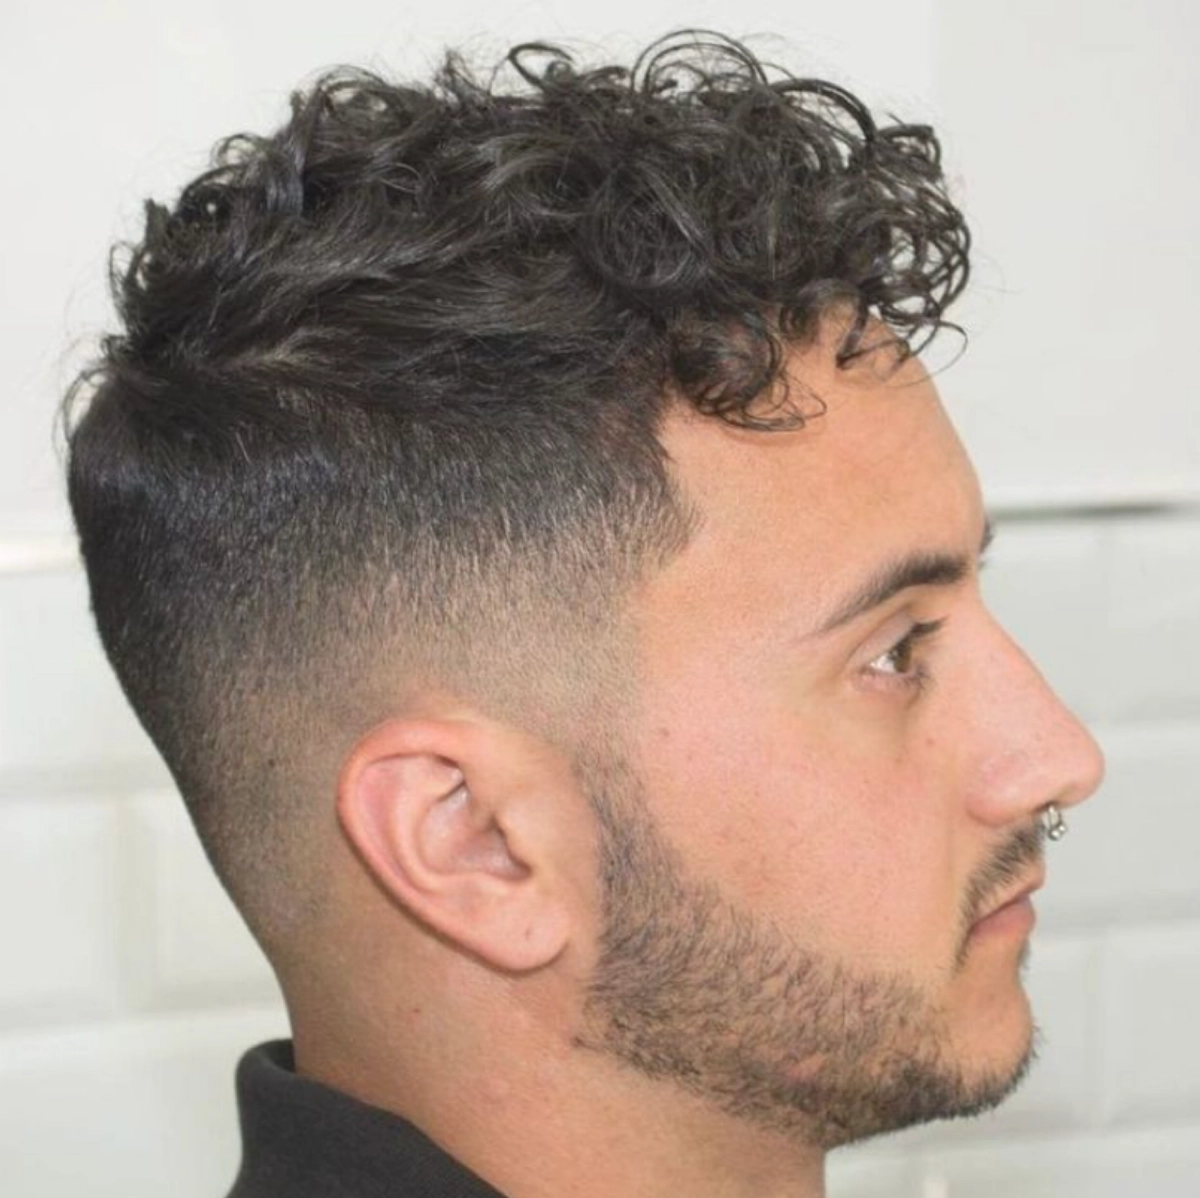 The Best Hair Products and Hairstyles for Men with Curly Hair – MEN'S BIZ